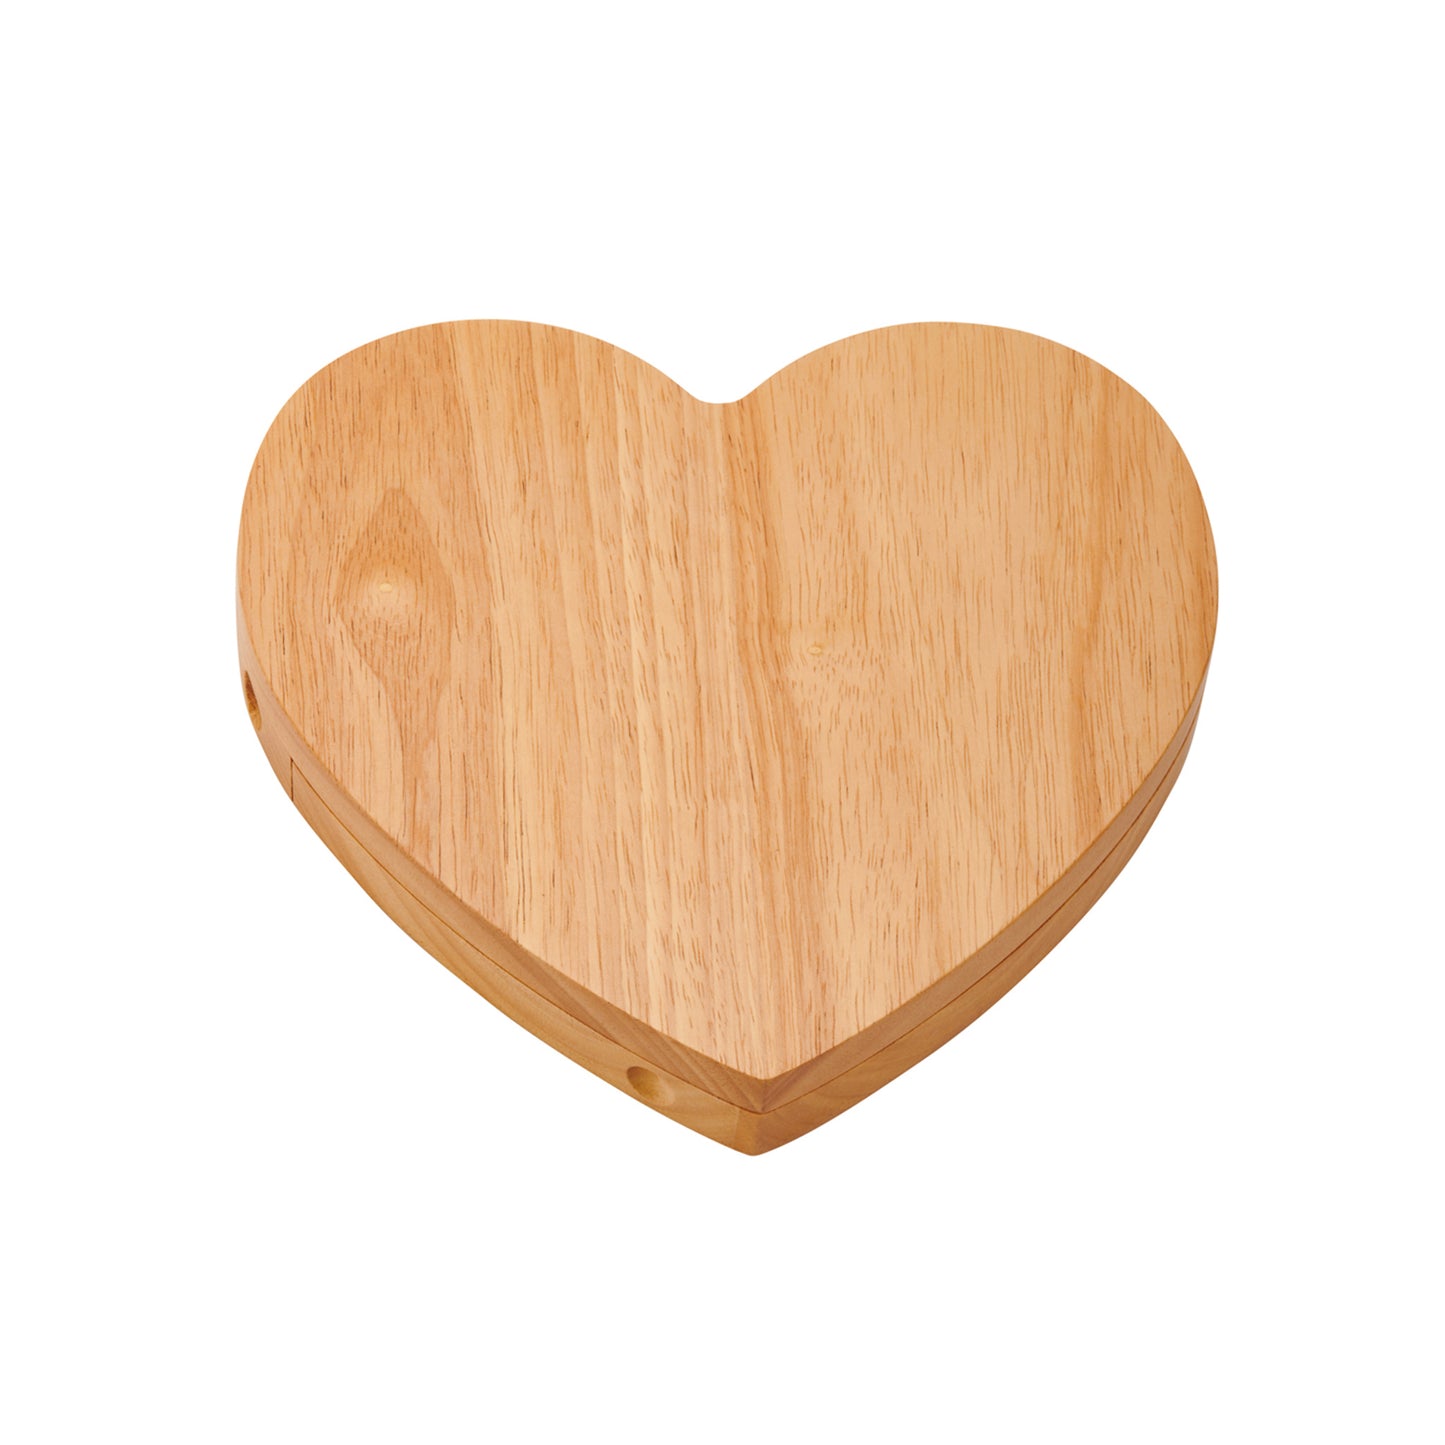 Wood Heart Cheese Set With 3 Wood Handled Utensils